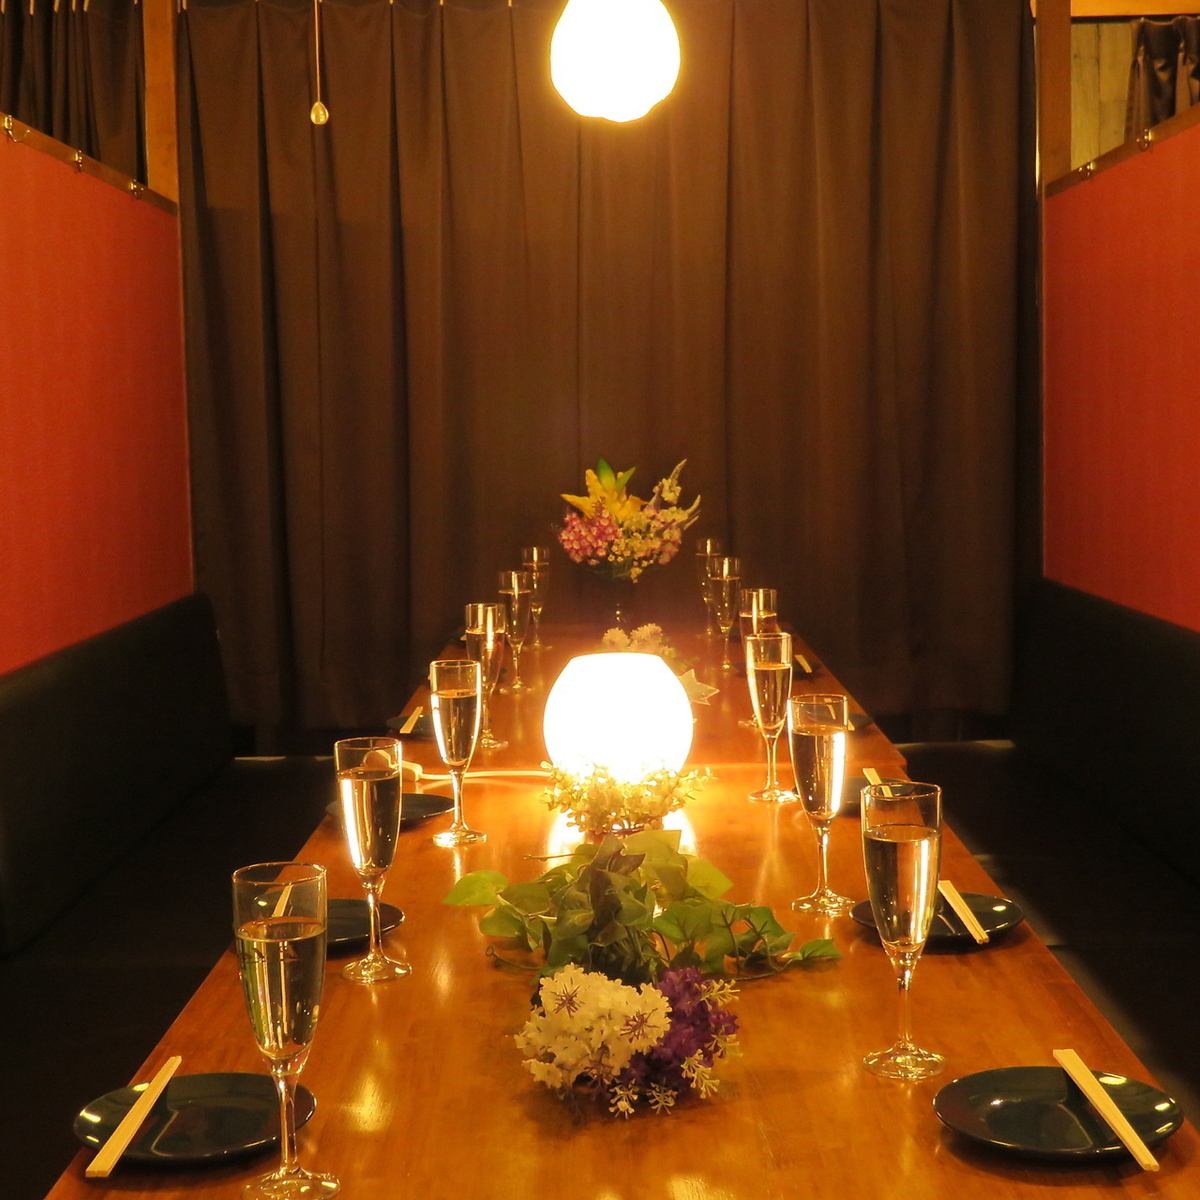 Many private rooms ☆ 4 people ~ maximum 60 people can be reserved!